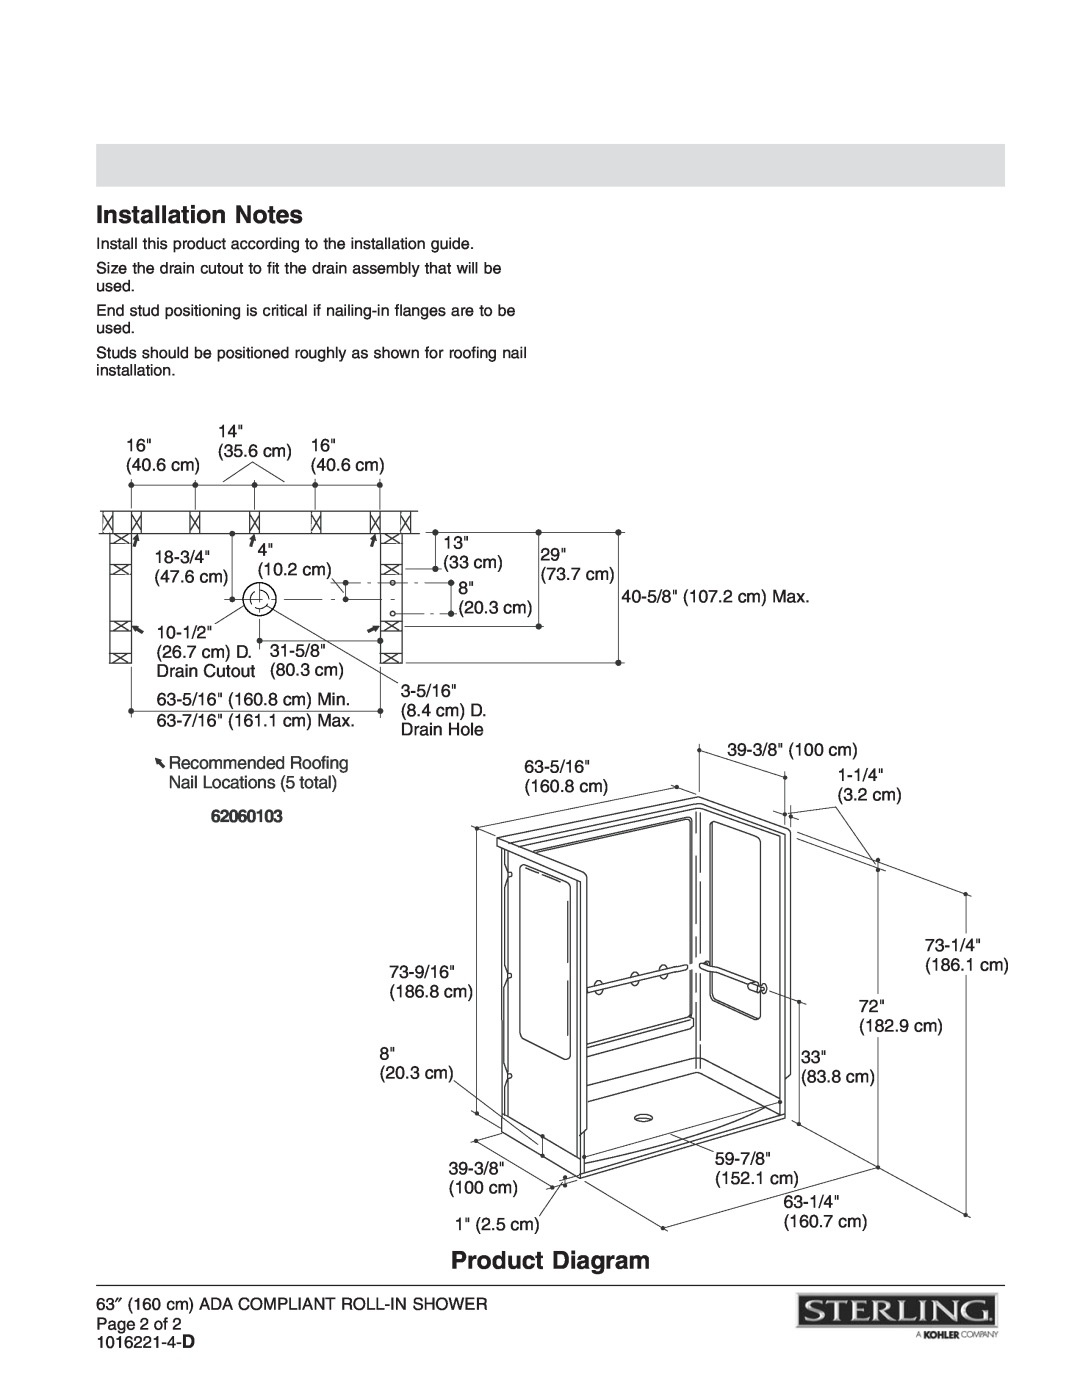 Sterling Plumbing 62060103 dimensions Installation Notes, Product Diagram 